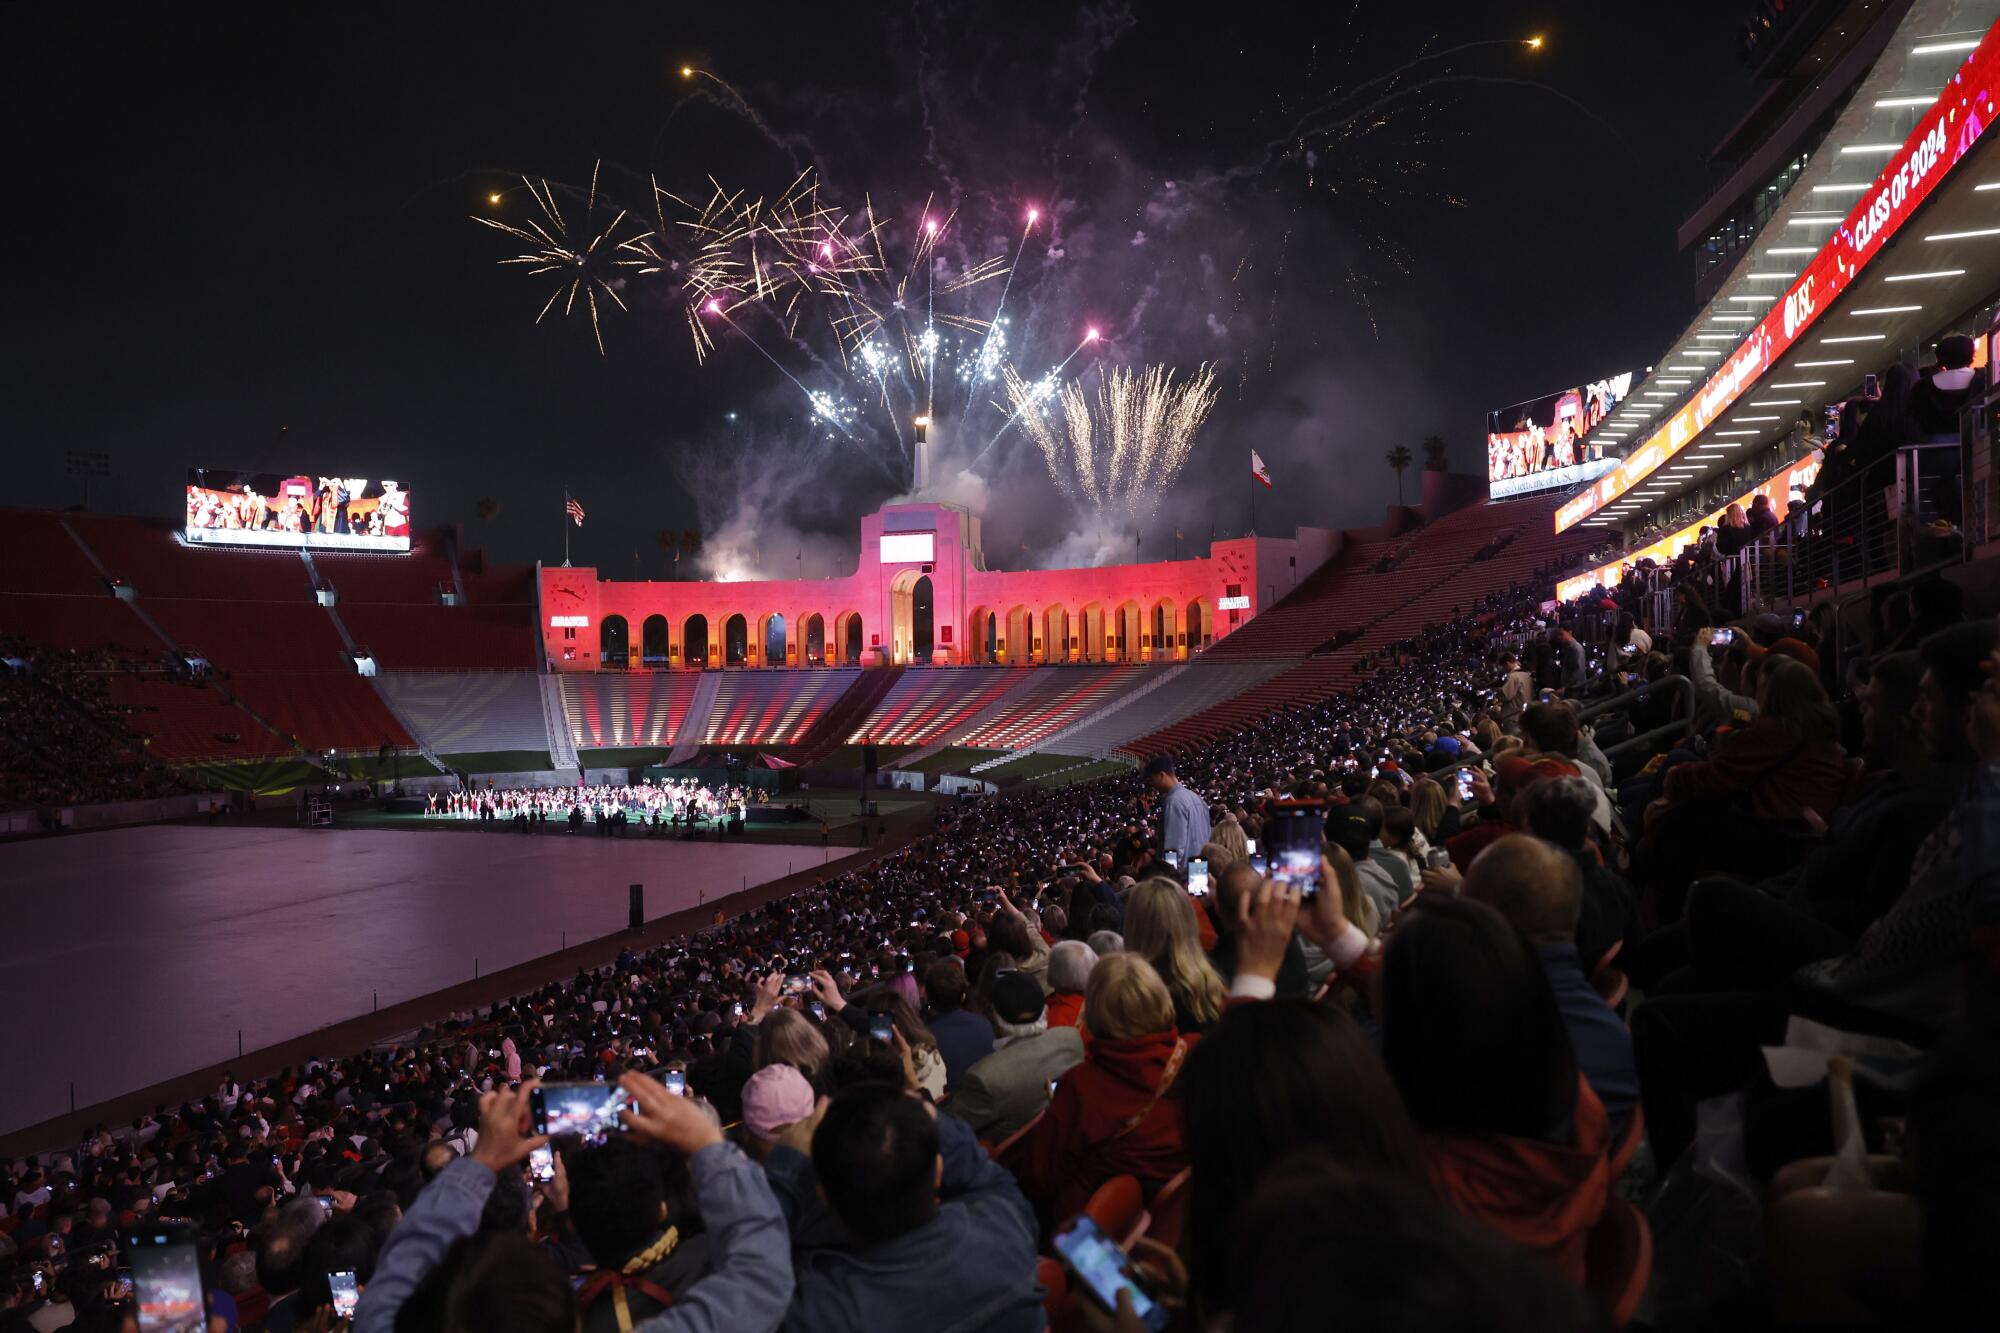 Spectators cheer and snap photos as fireworks go off at the "Trojan Family Graduate Celebration" at the Coliseum